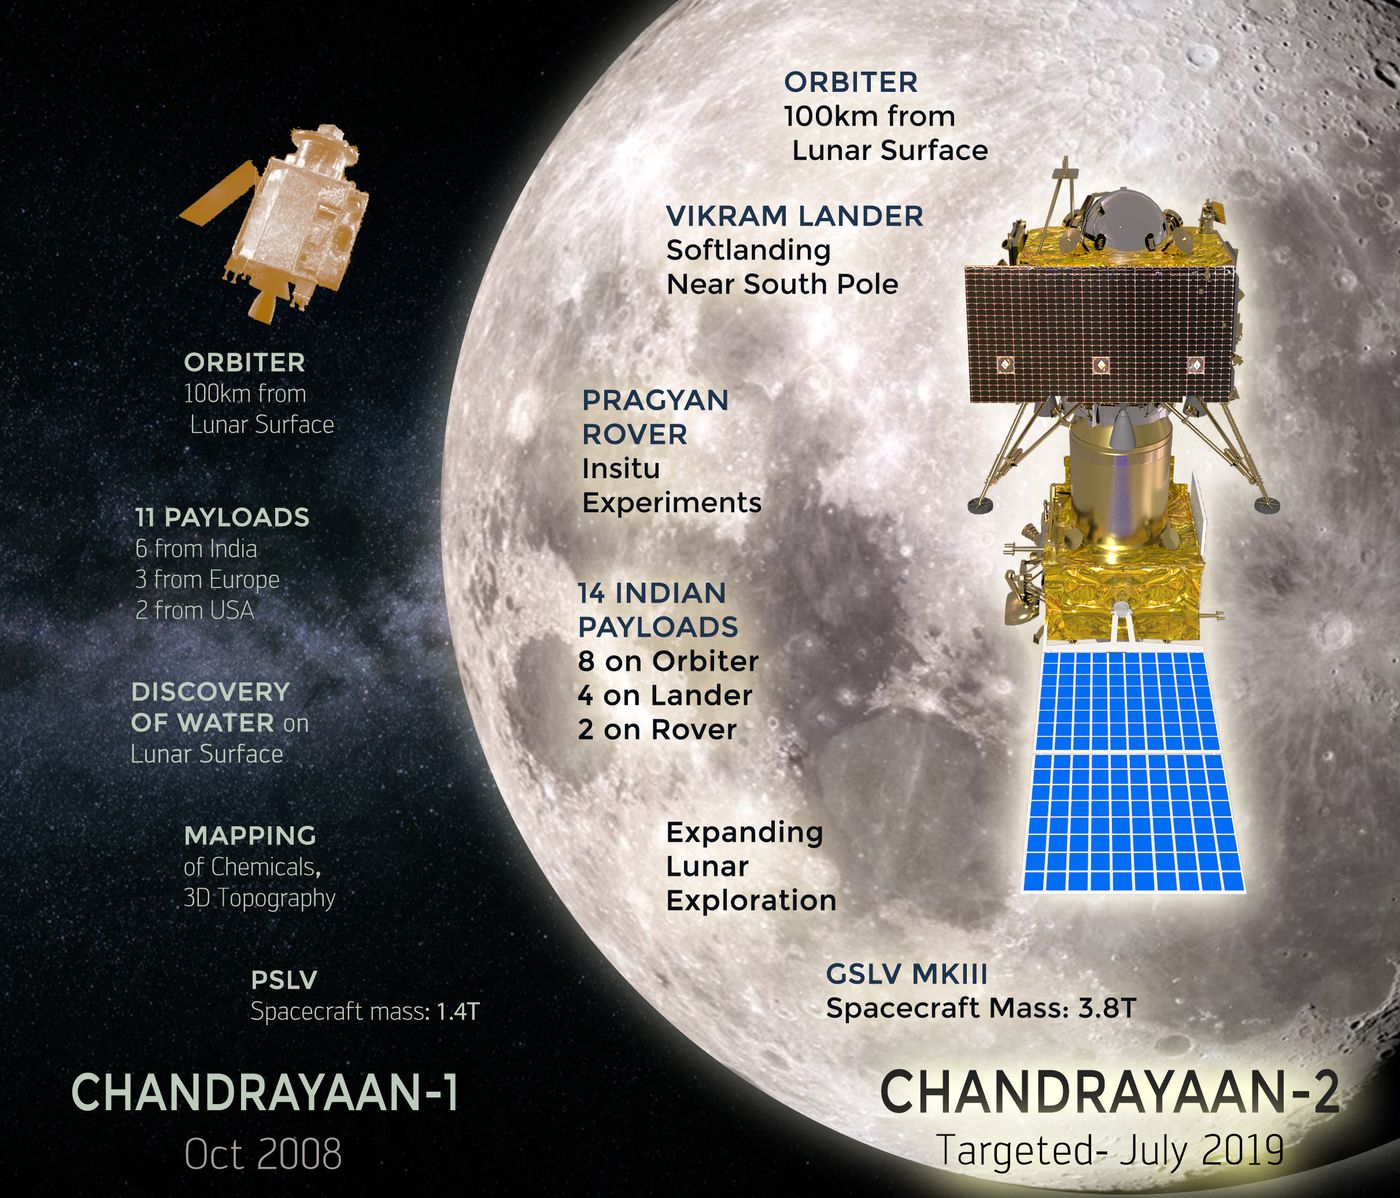 An overview of the Chandrayaan-2 mission.